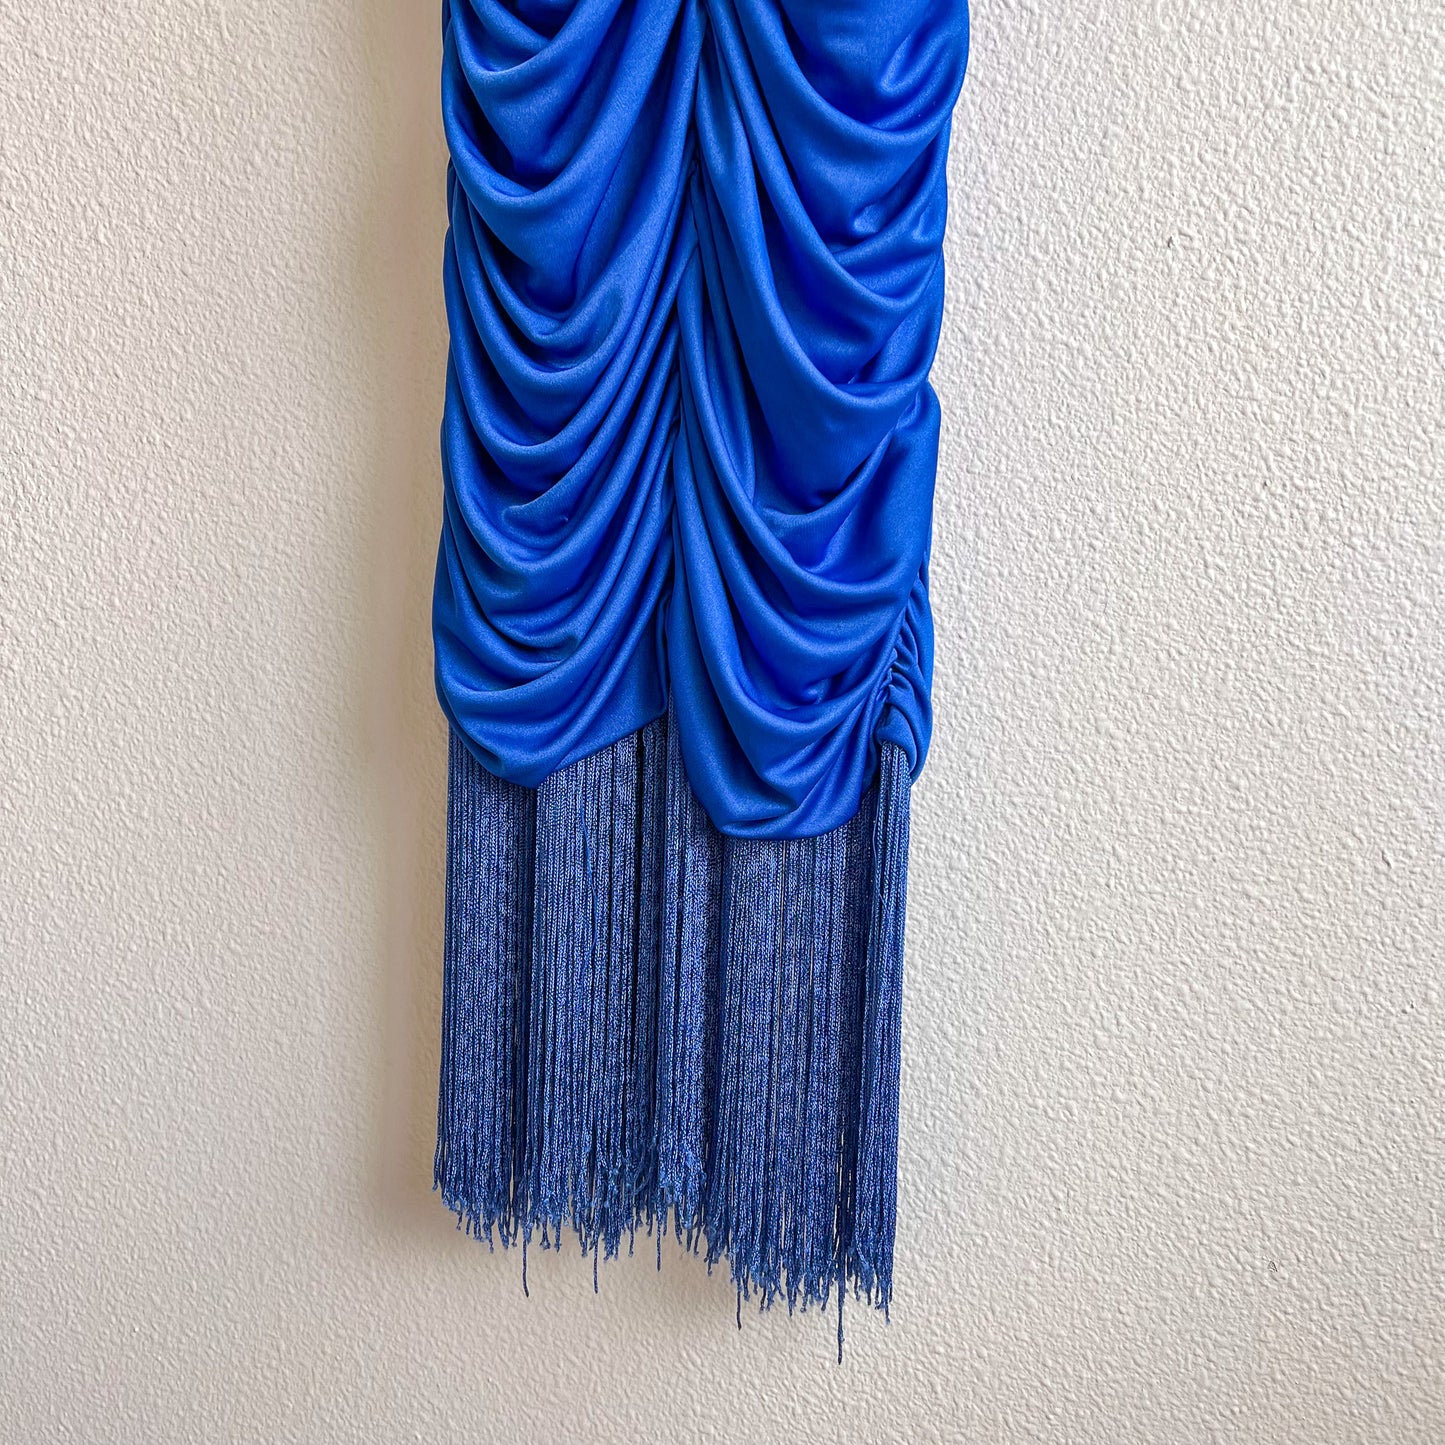 Sexy 1980s Royal Blue Ruched Party Dress (M/L)